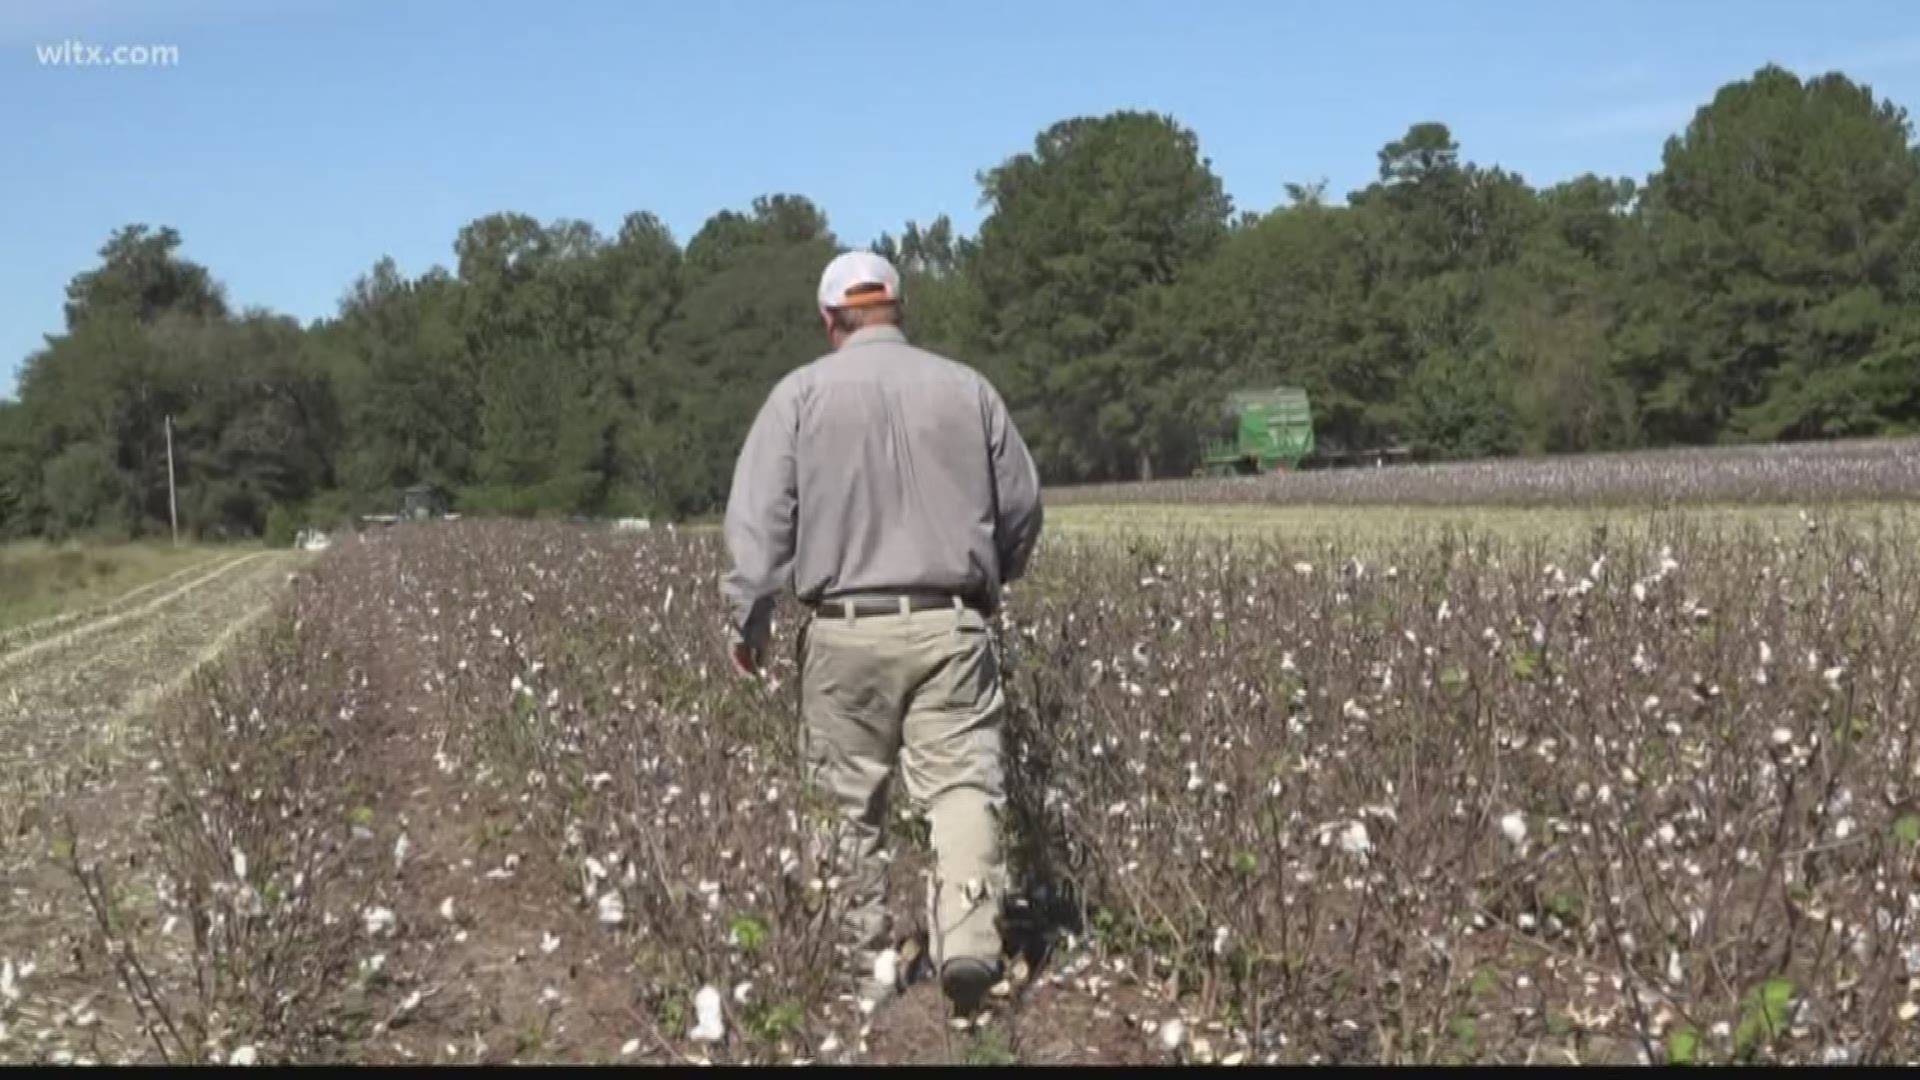 South Carolina farmers are feeling the effect of the drought